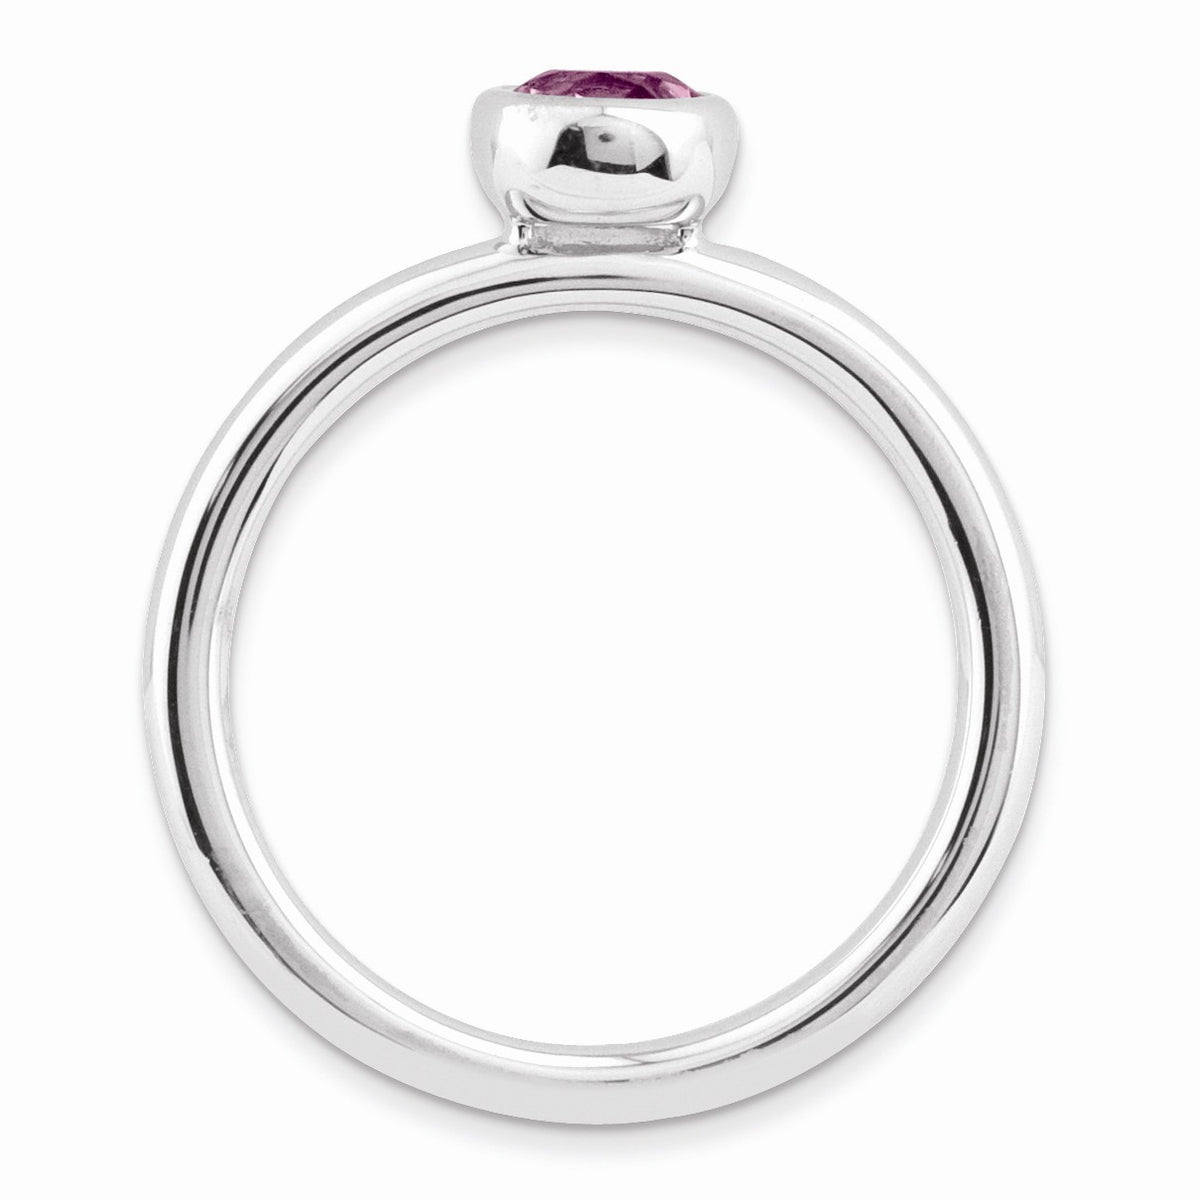 Alternate view of the Stackable Low Profile 5mm Rhodolite Garnet Silver Ring by The Black Bow Jewelry Co.